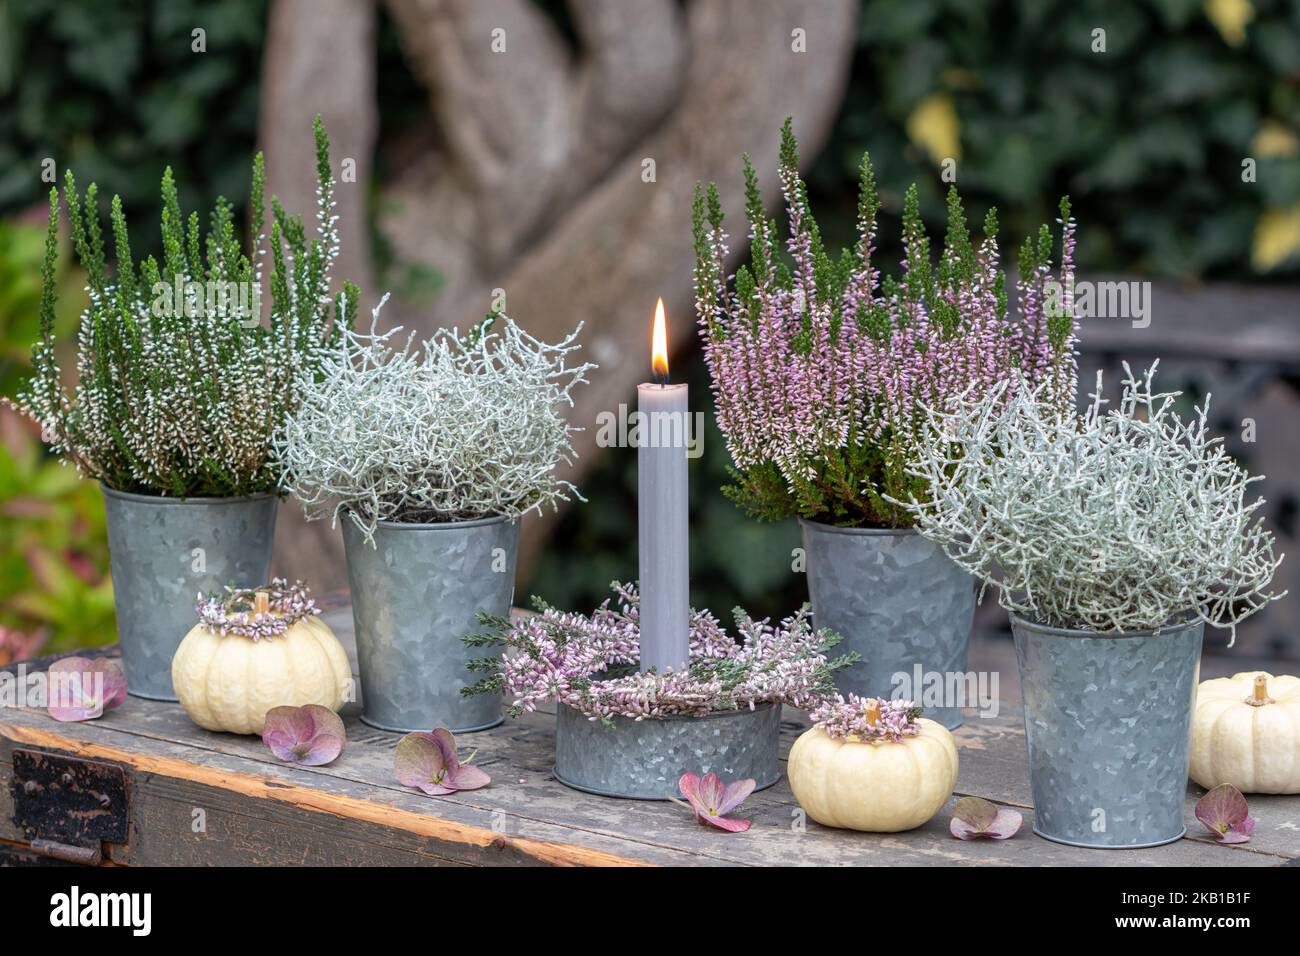 garden arrangement with candle, calocephalus brownii and heather flowers in zinc pots Stock Photo